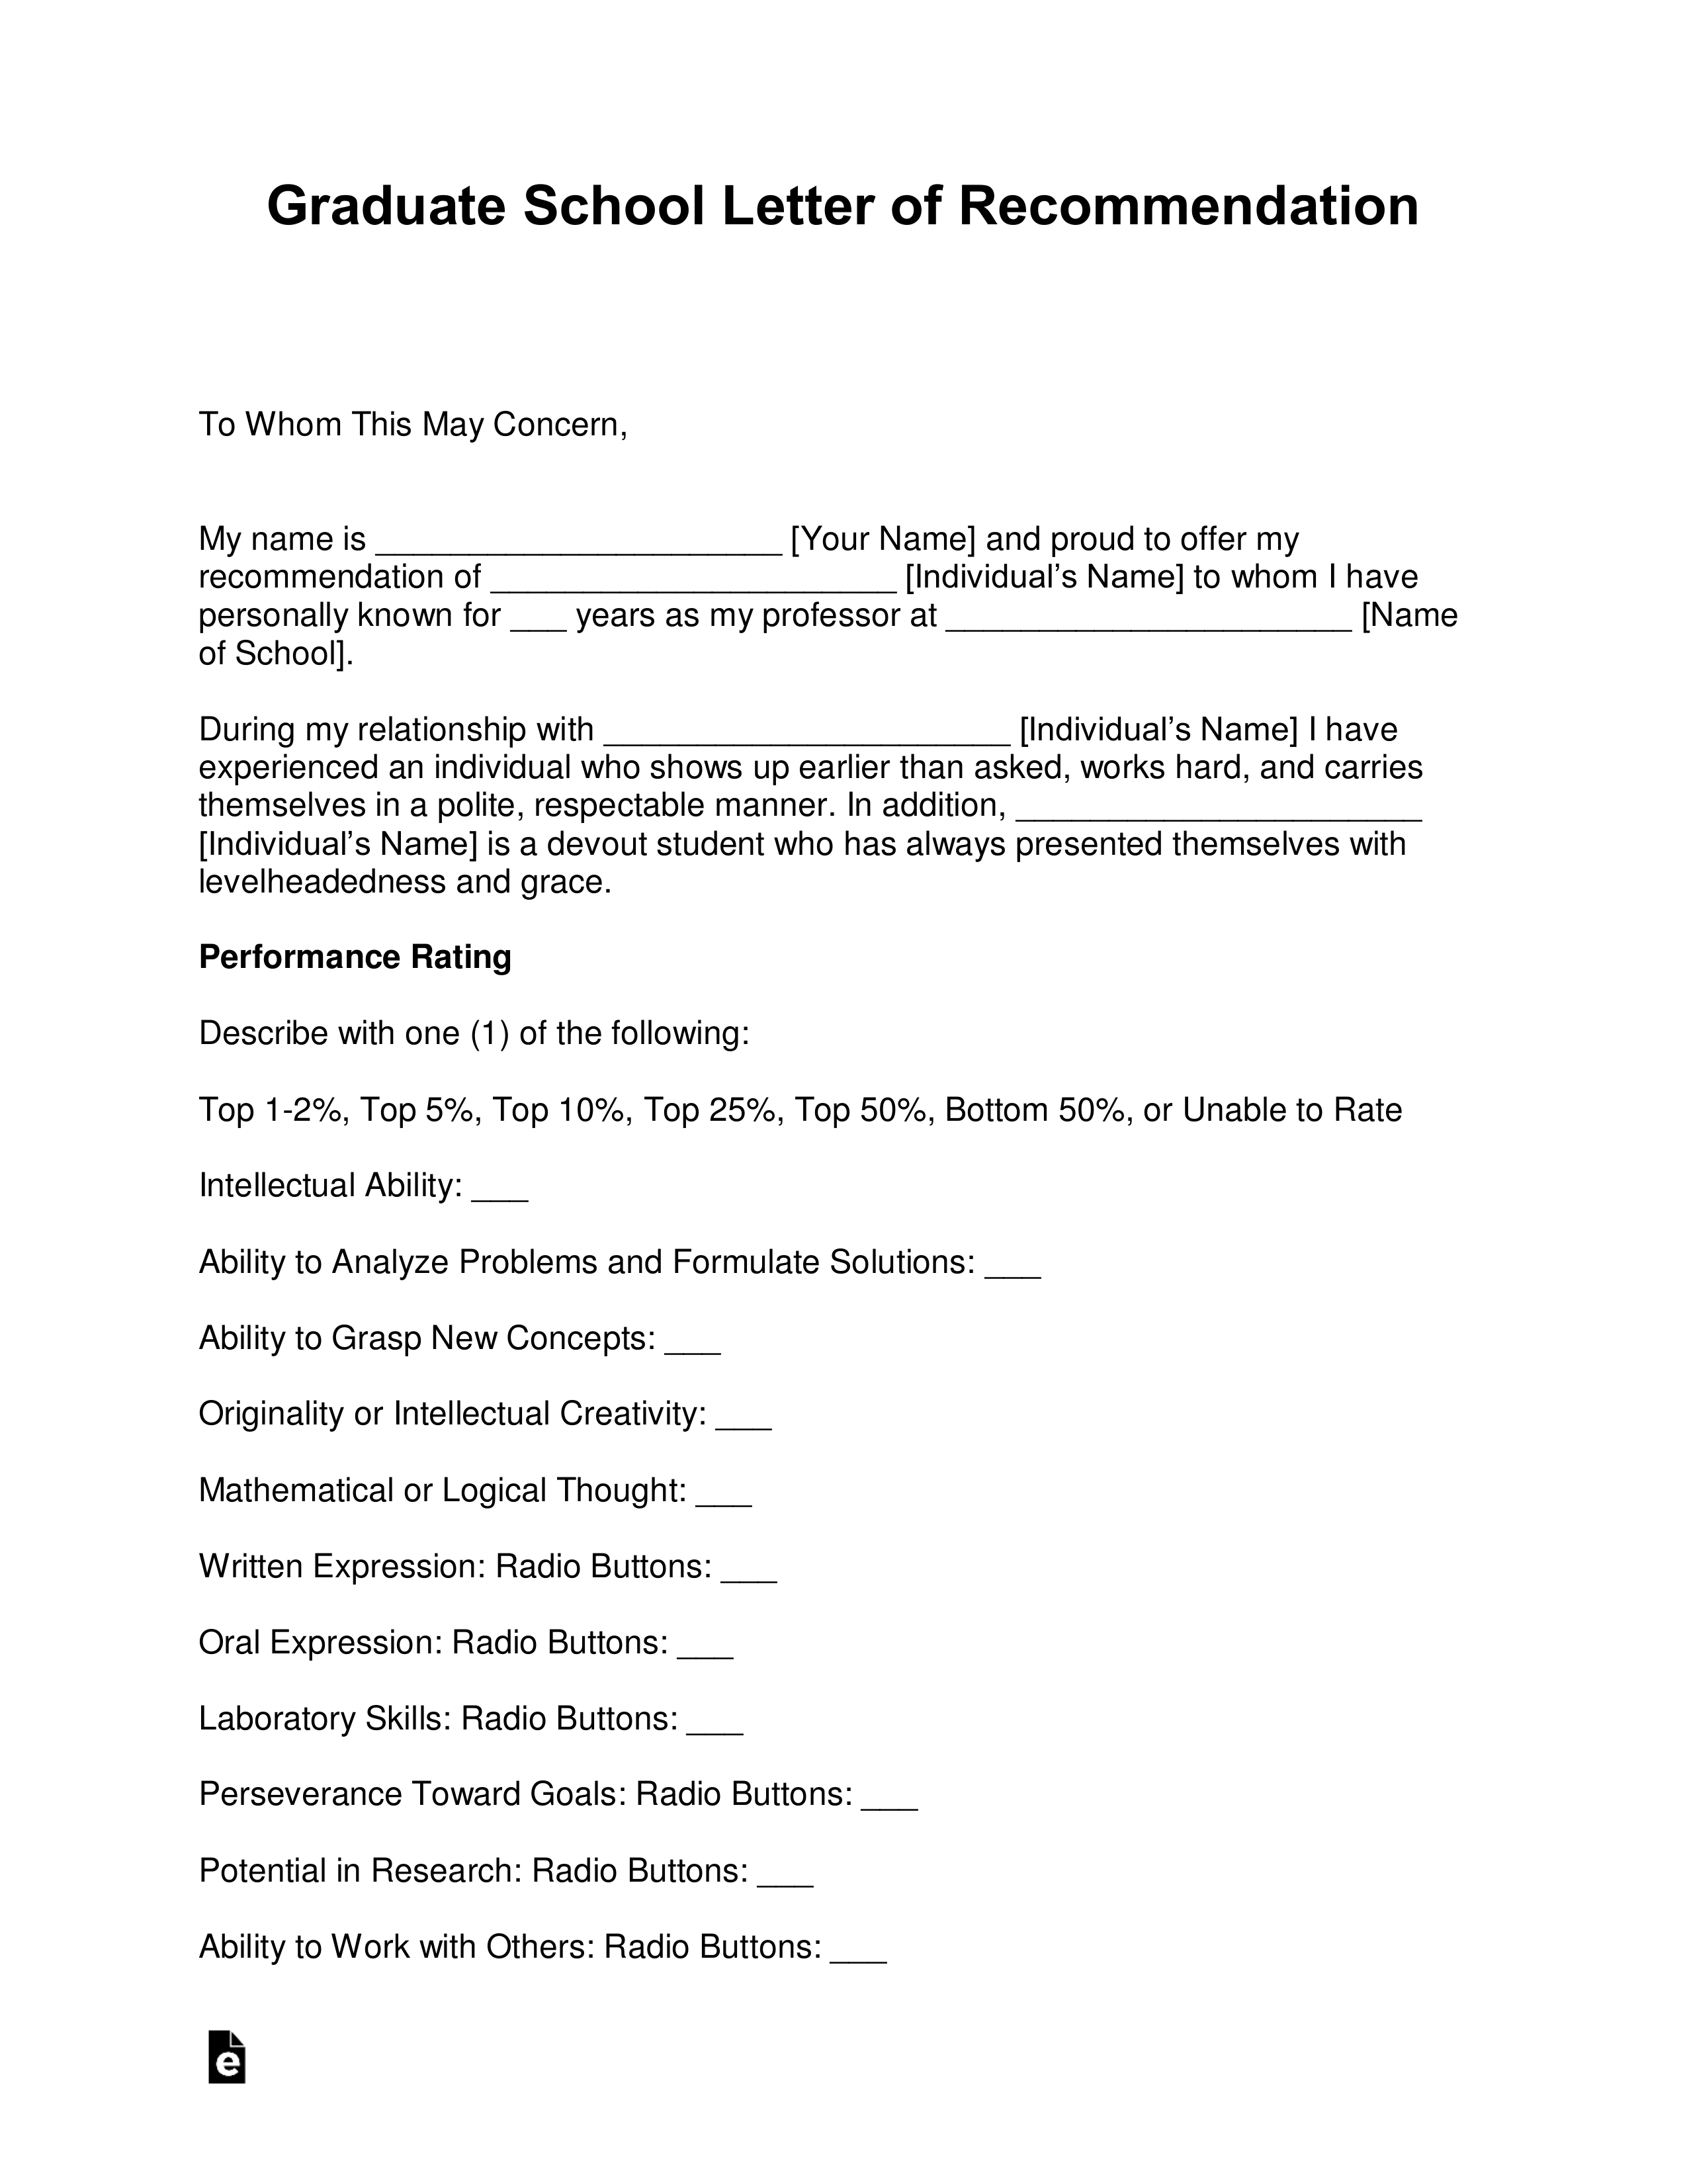 Sample Personal Letter Of Recommendation For Friend